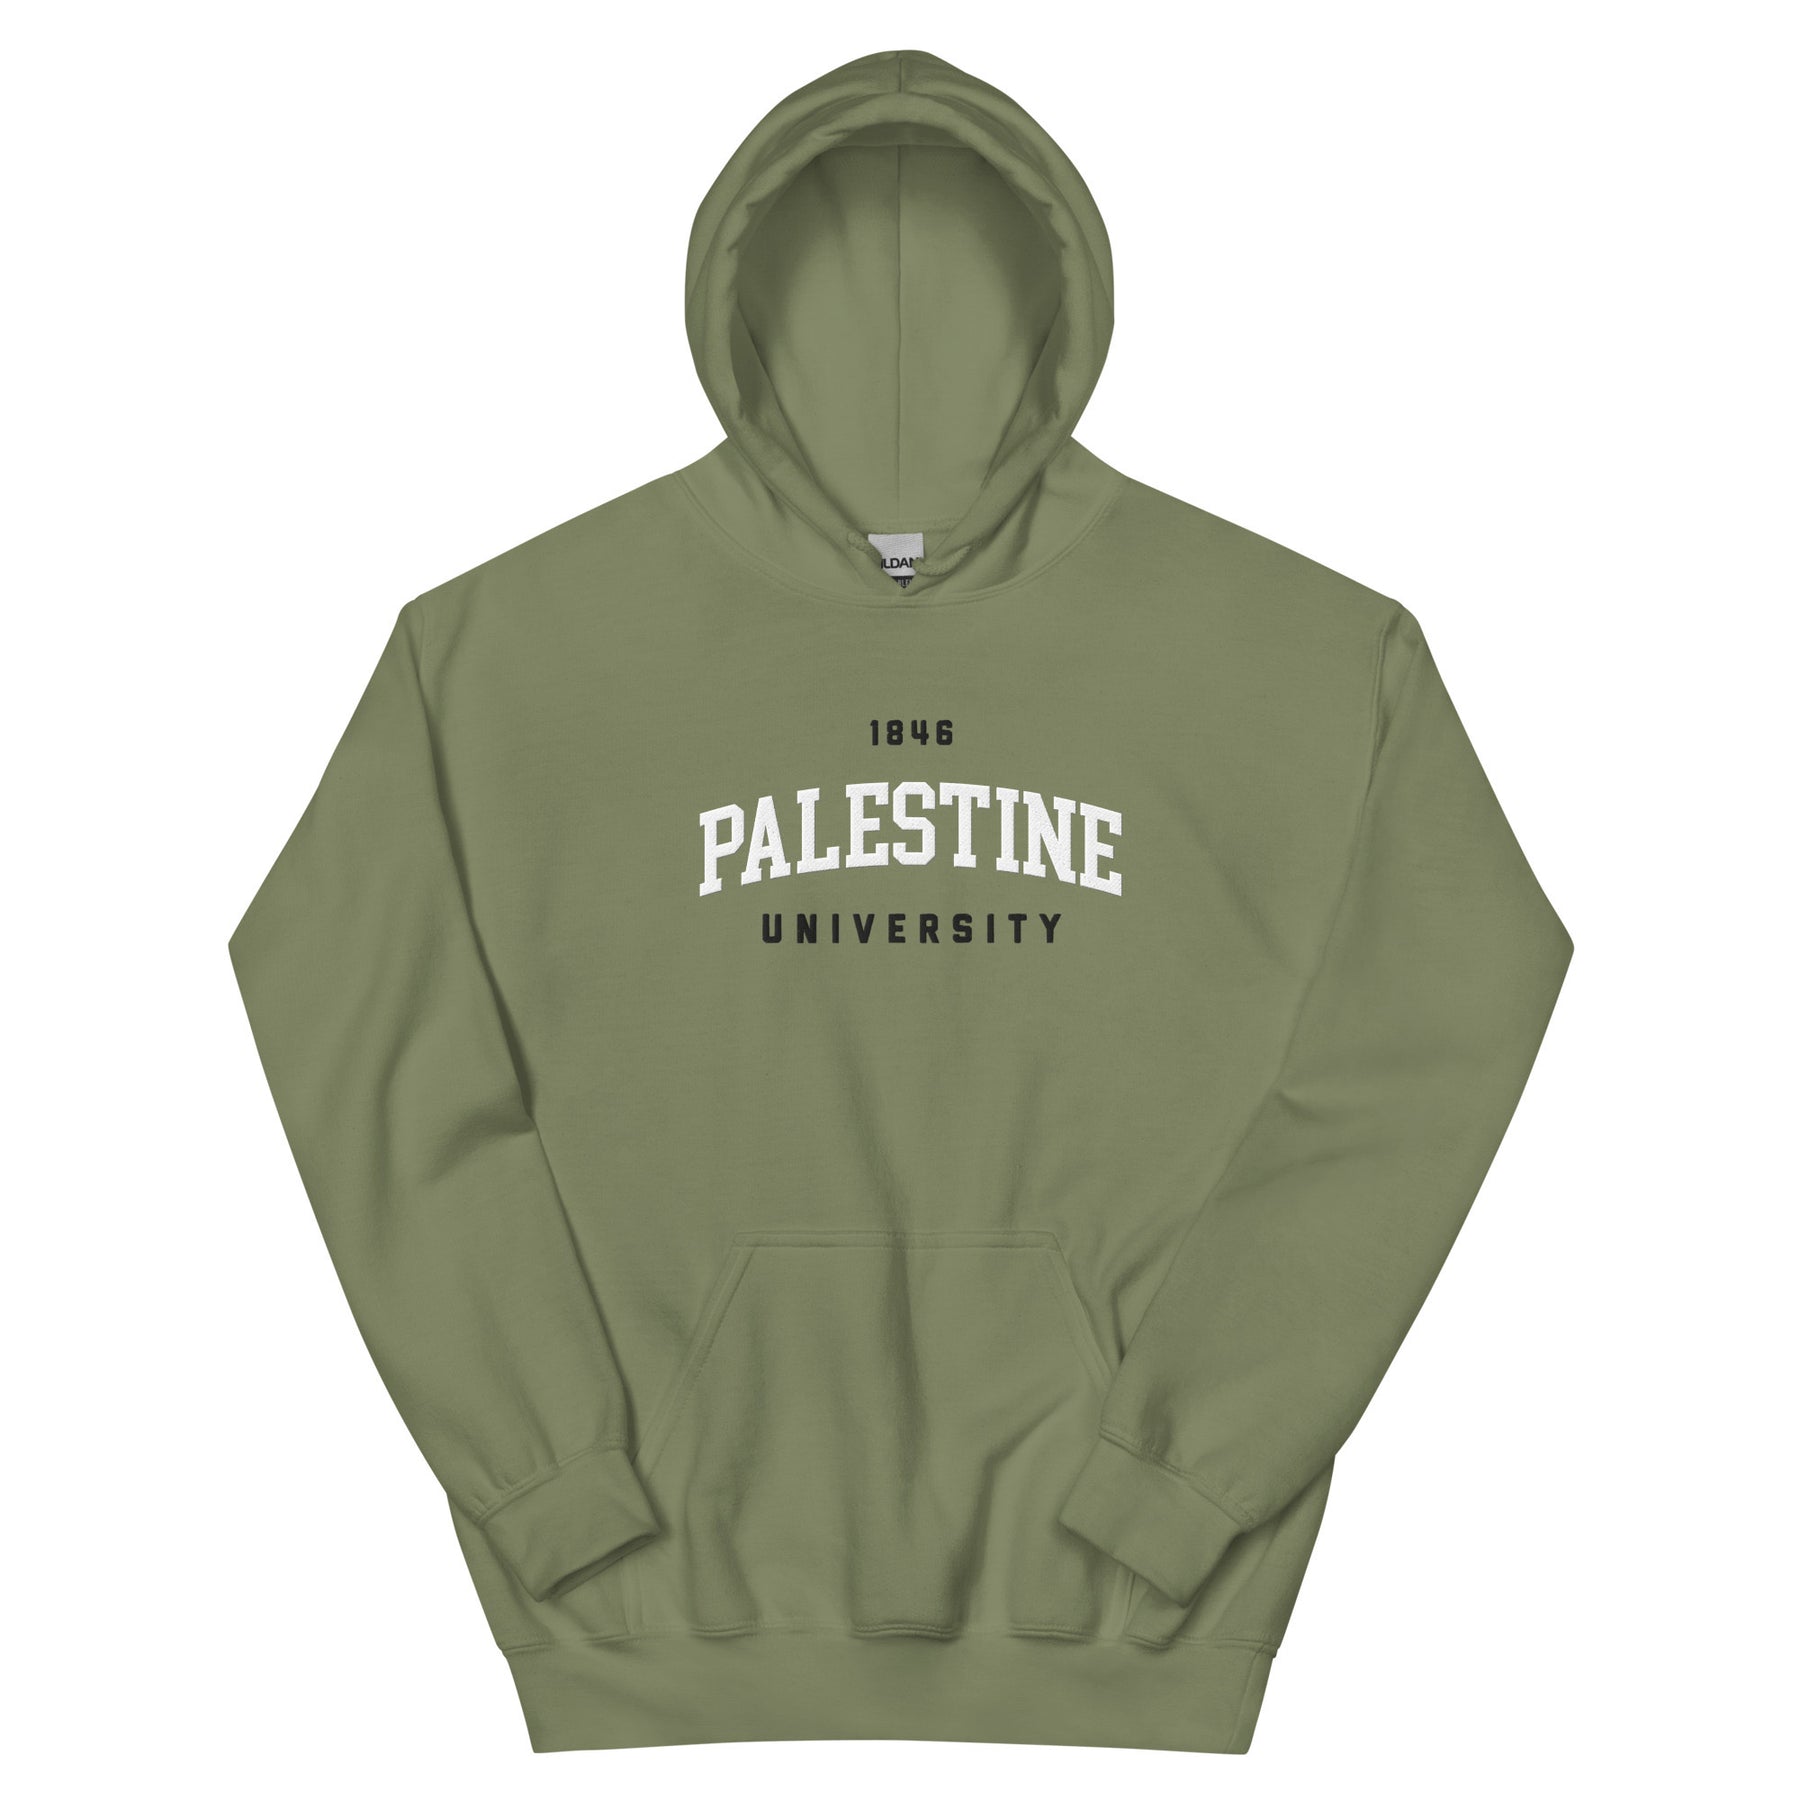 Palestine University 1846 hoodie in green by Dar Collective